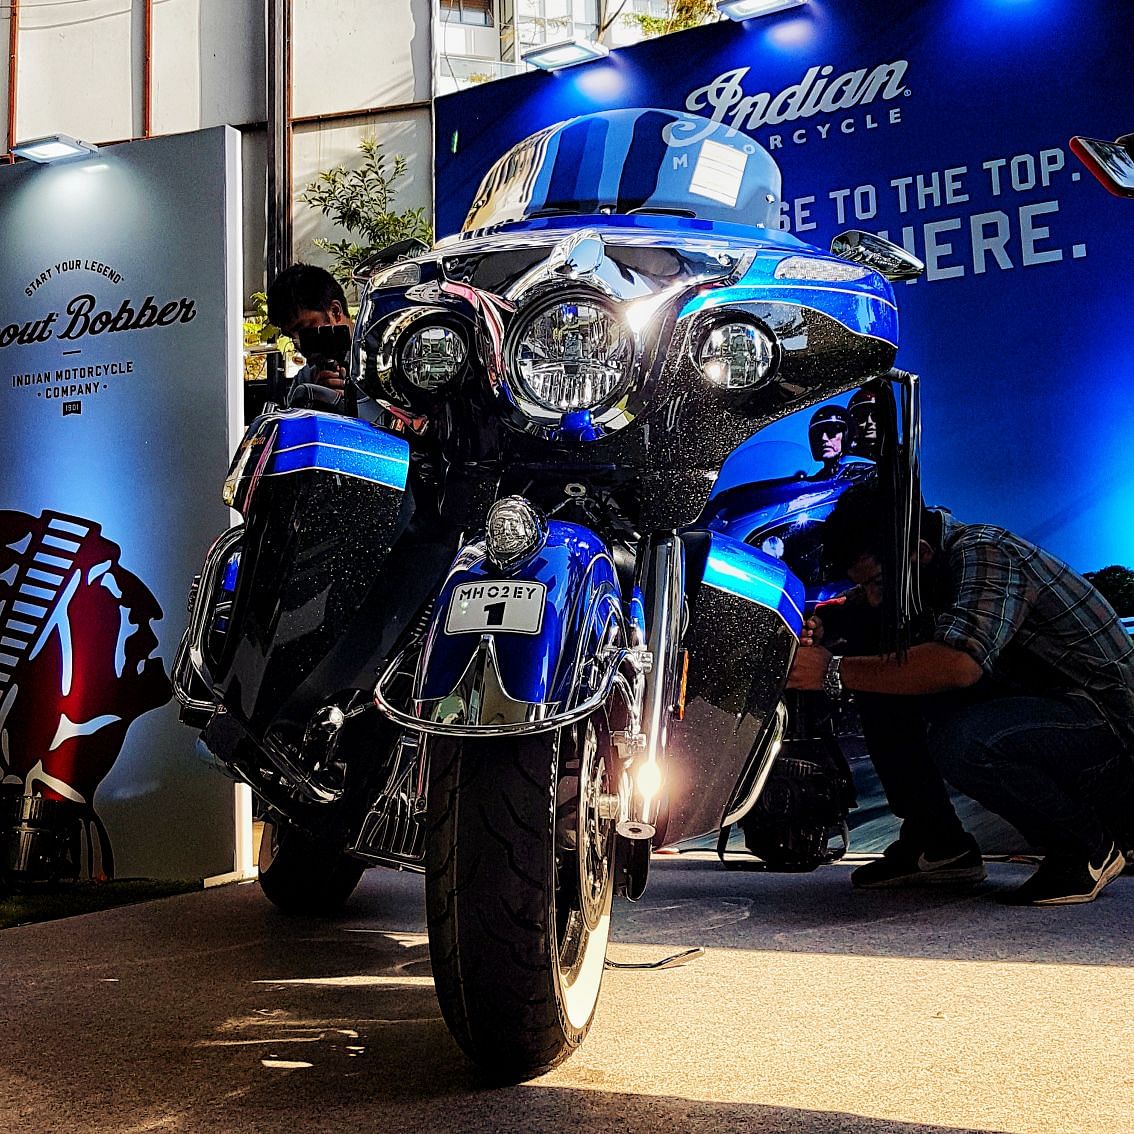 Only 300 units of the Indian Roadmaster Elite will be made. India gets only two bikes and both have been sold.